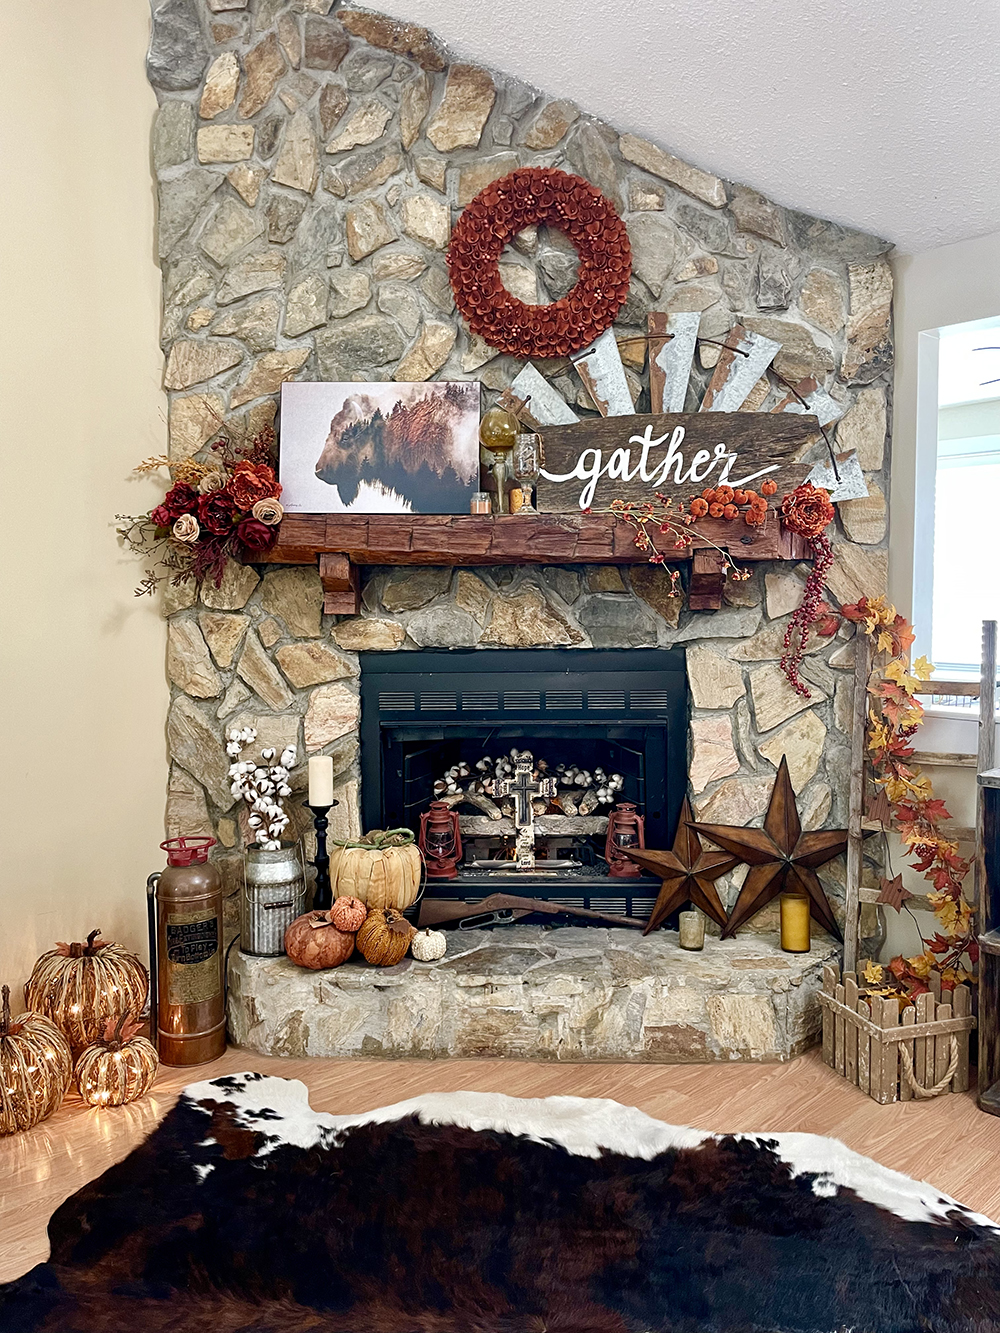 More Fall Decor Tips to Make Your Home Look Amazing